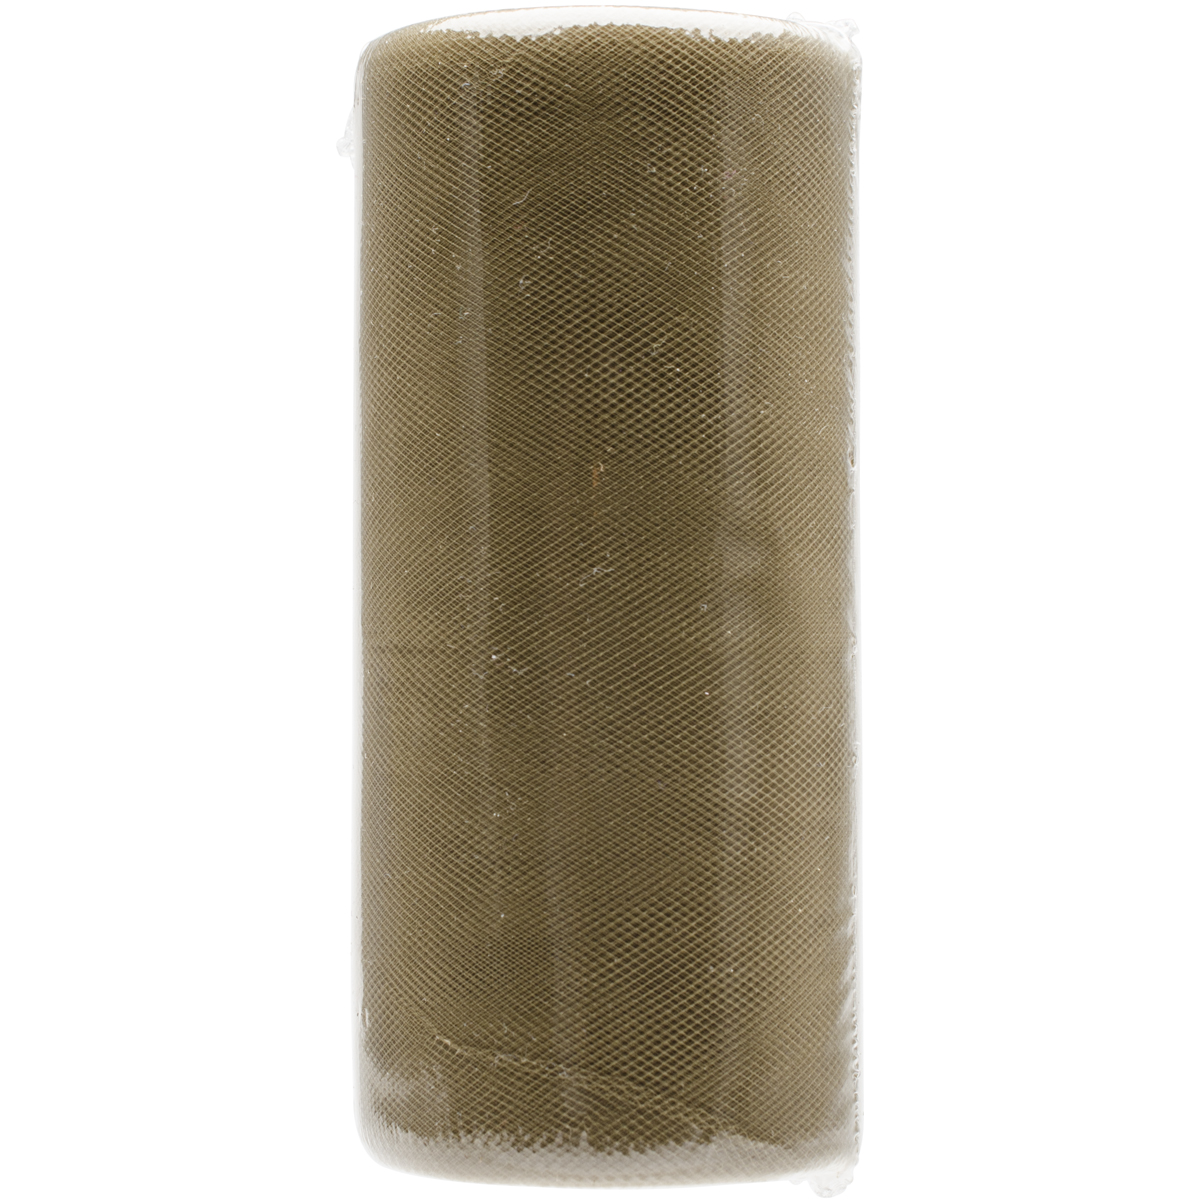 Tulle 6" Wide 25yd Spool-Antique Gold, Pk 3, Falk - image 1 of 2